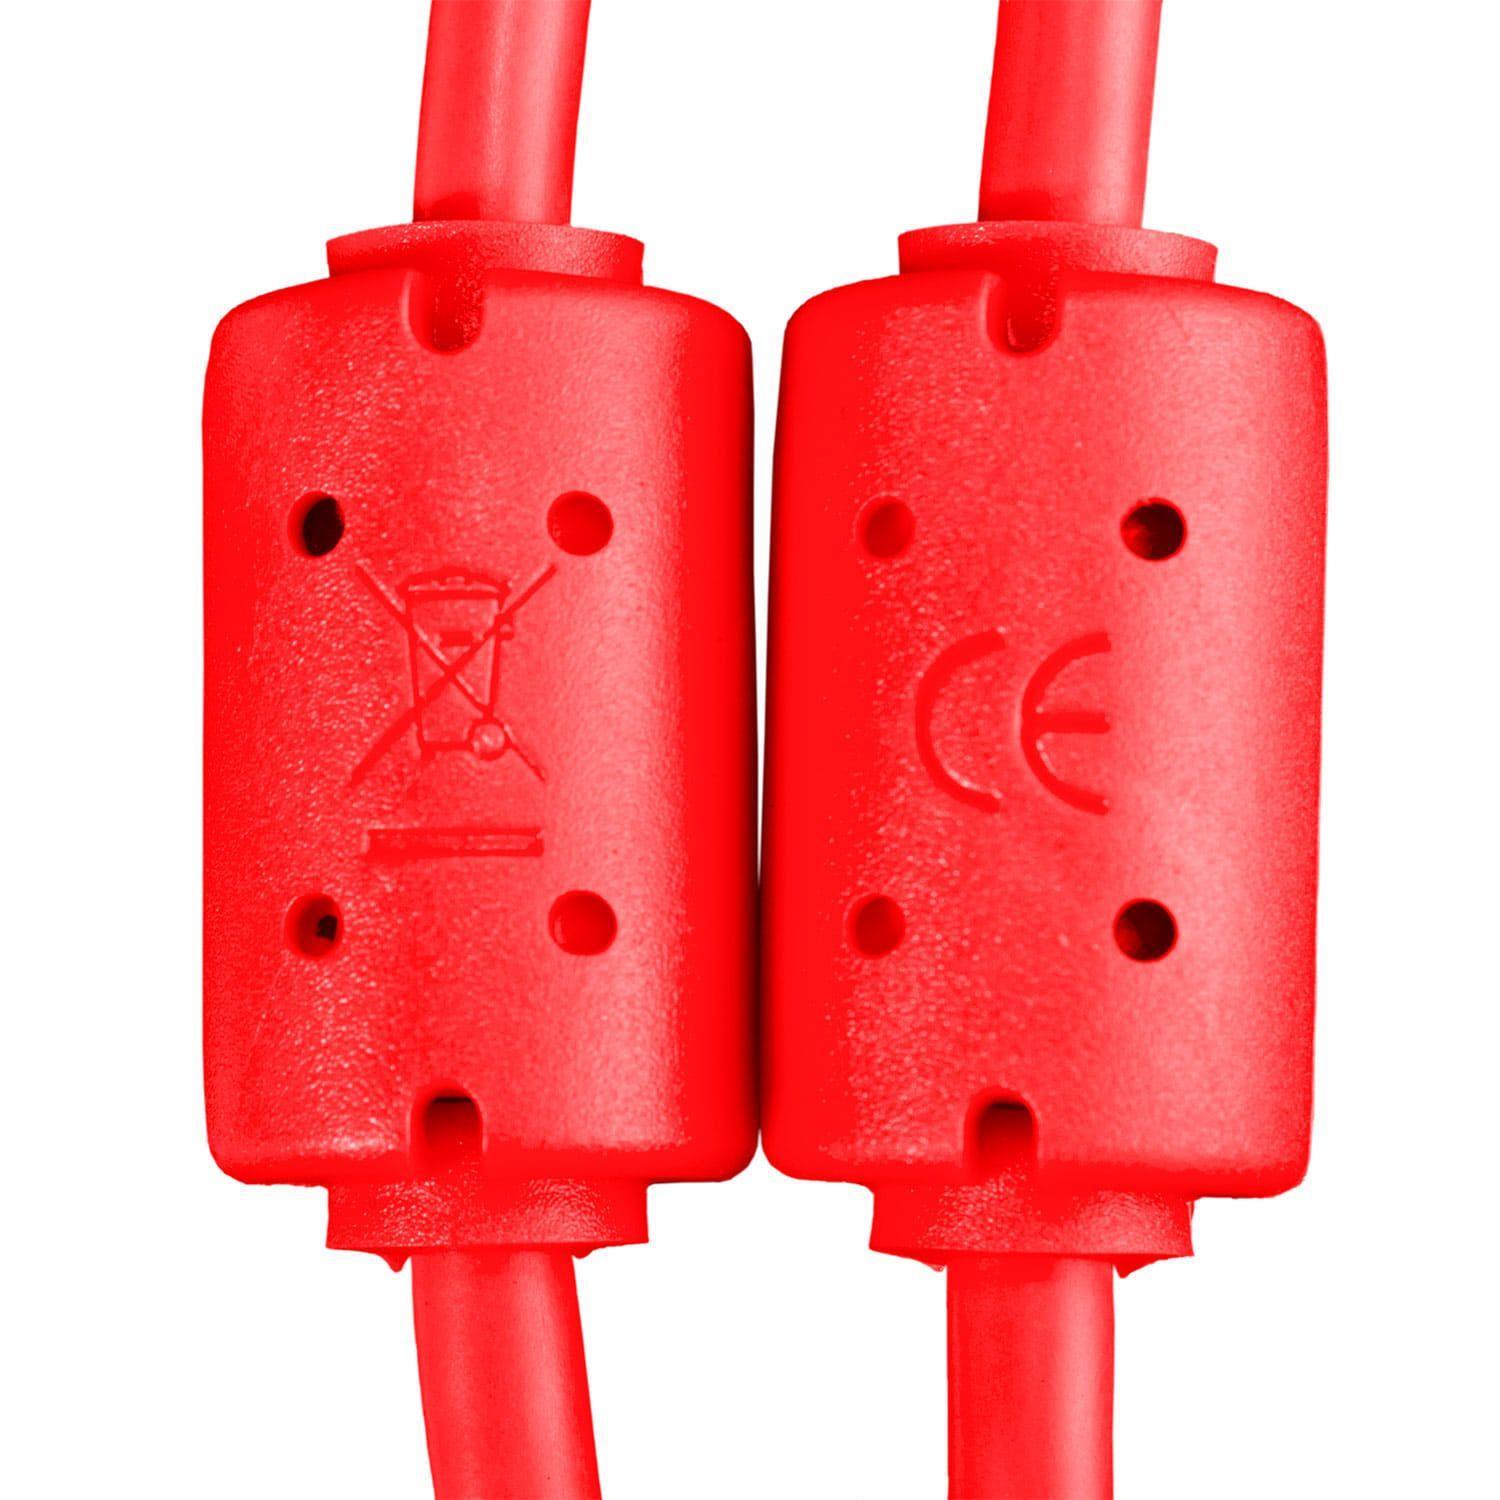 UDG Cable USB 2.0 (Type C-B) Straight 1.5M Red - DY Pro Audio